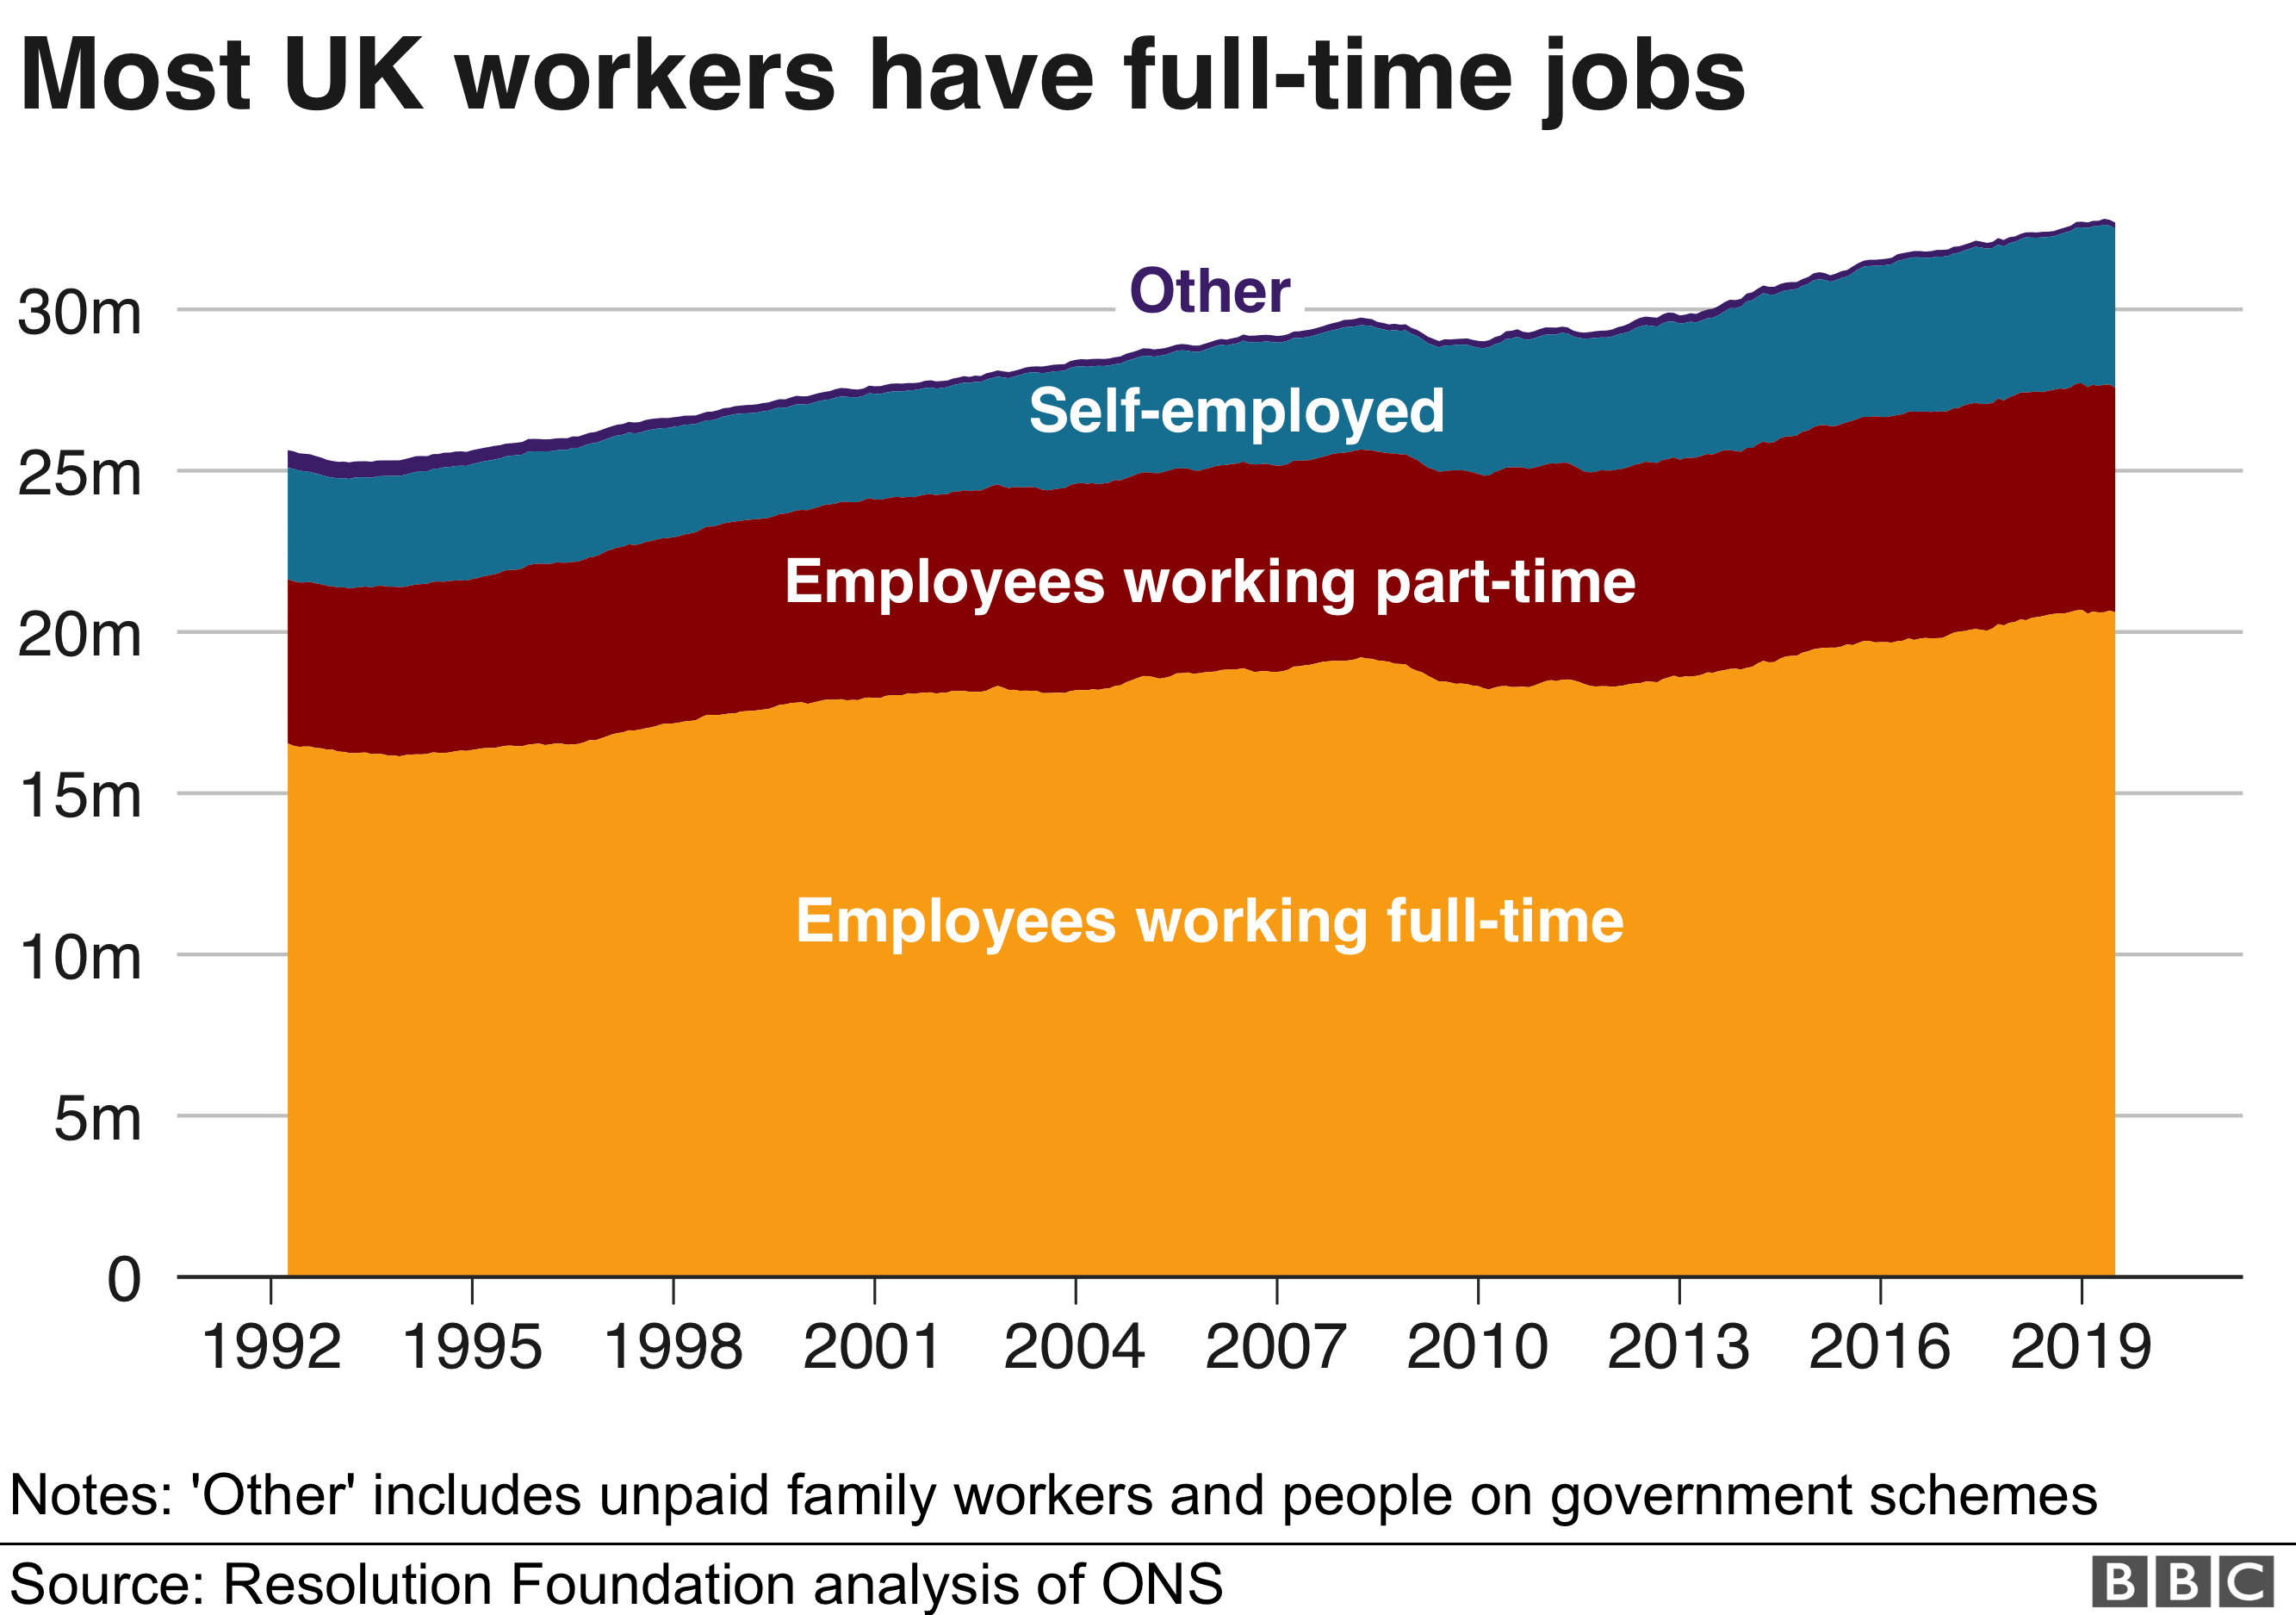 Most UK workers have full-time jobs